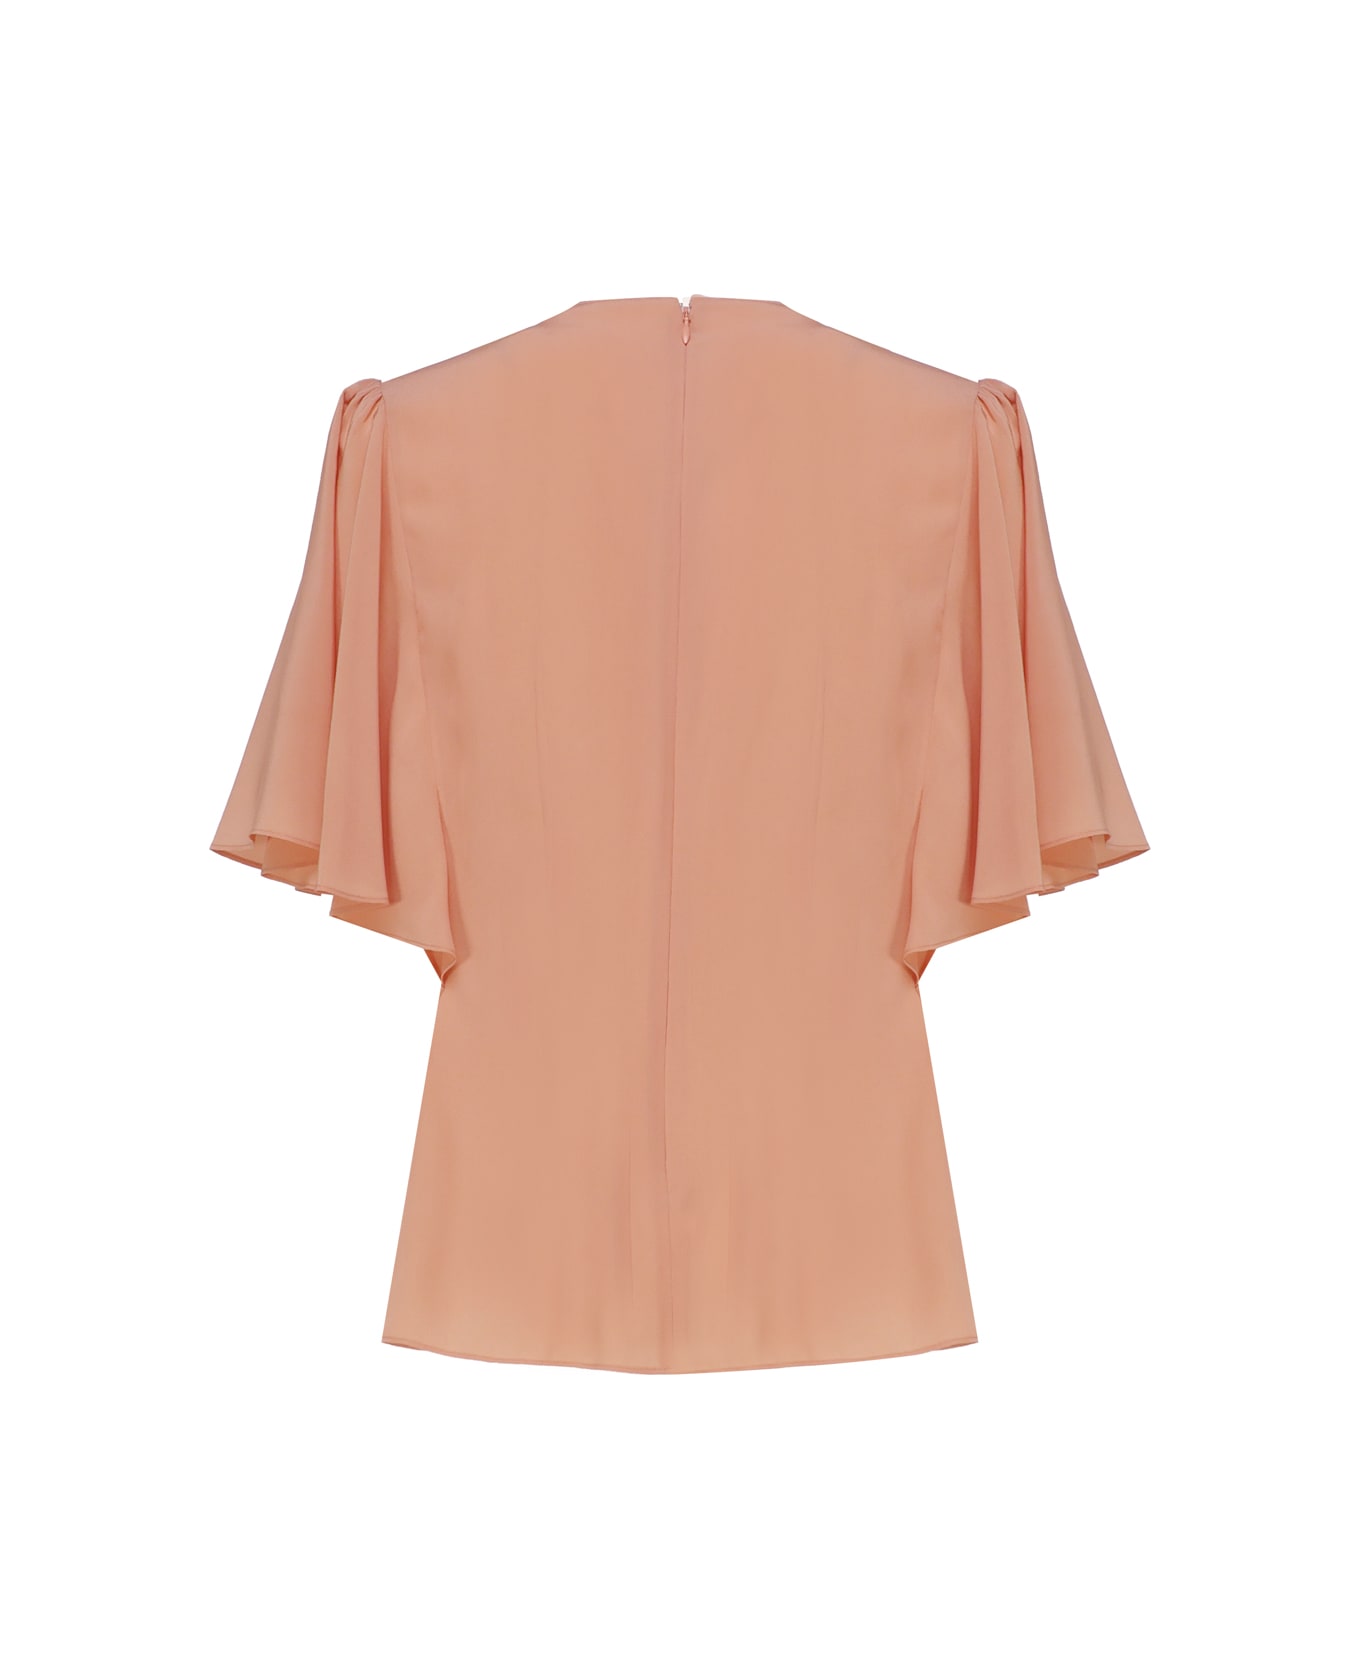 Chloé Top With Cap Sleeves - Pink トップス